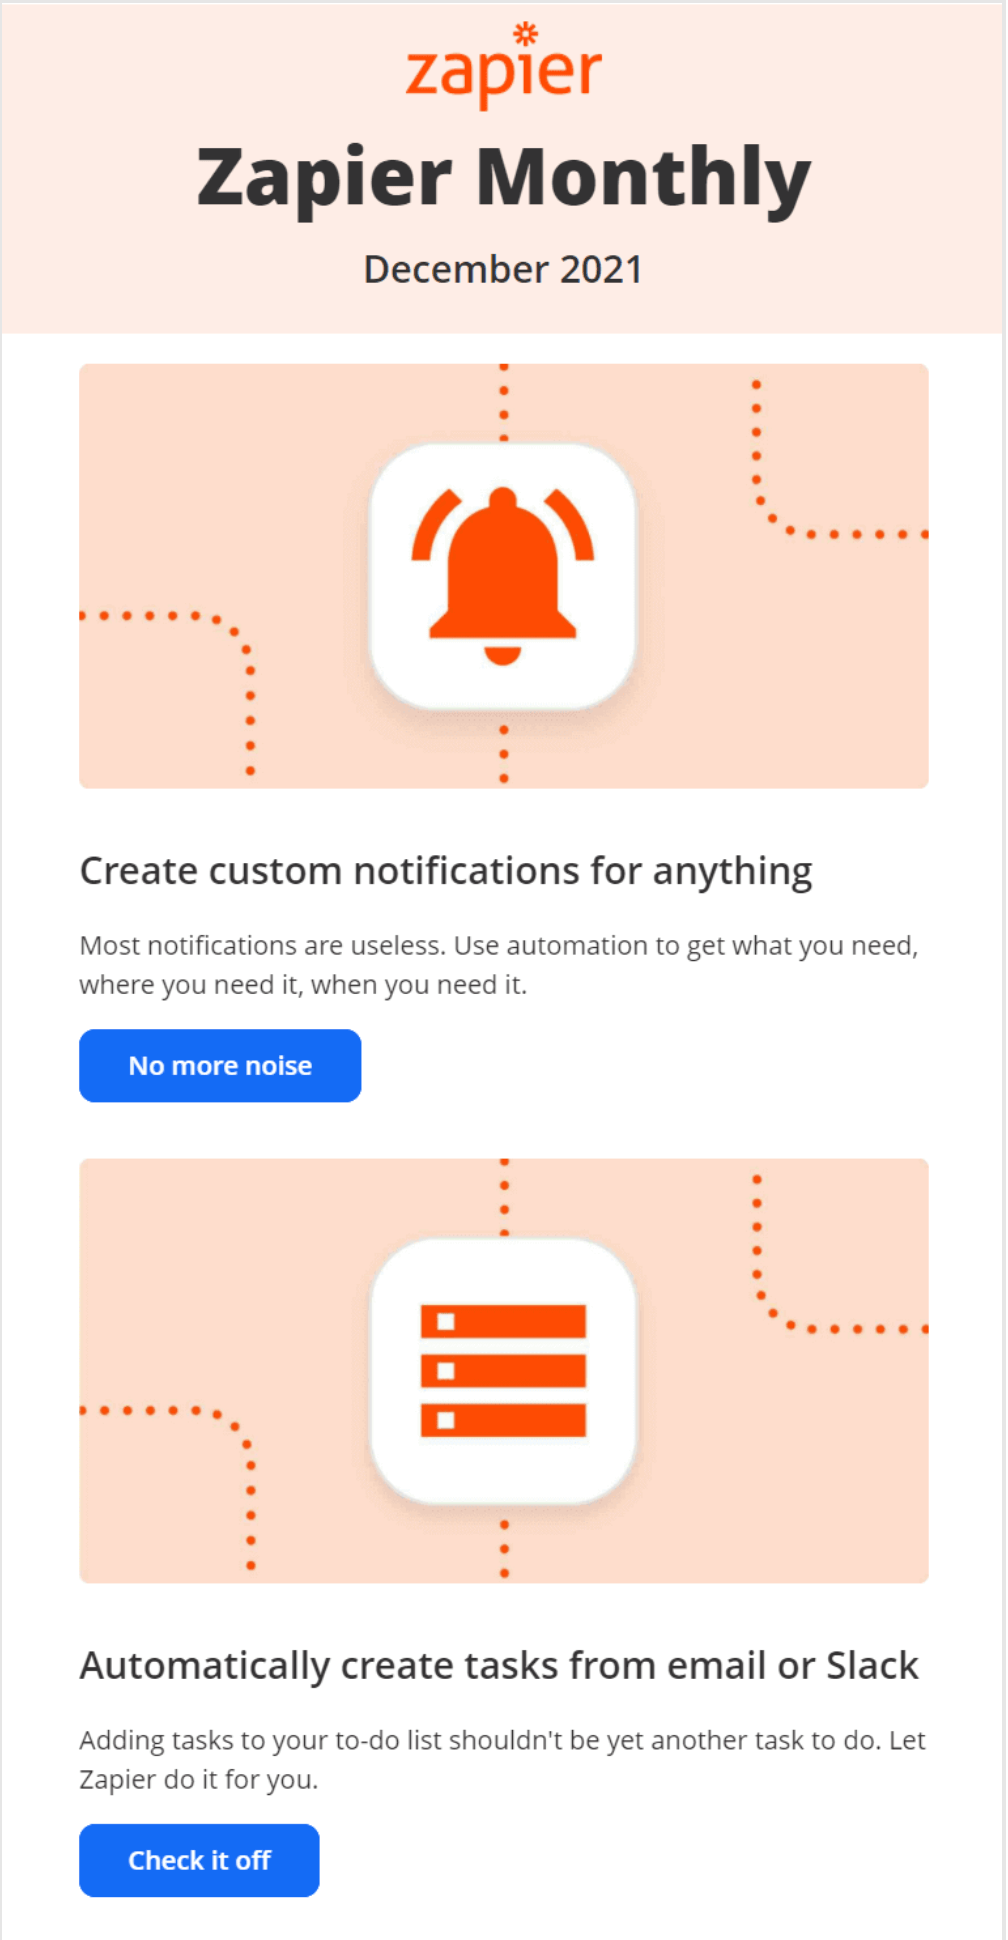 A Zapier email promoting custom notifications and integrations with email and Slack